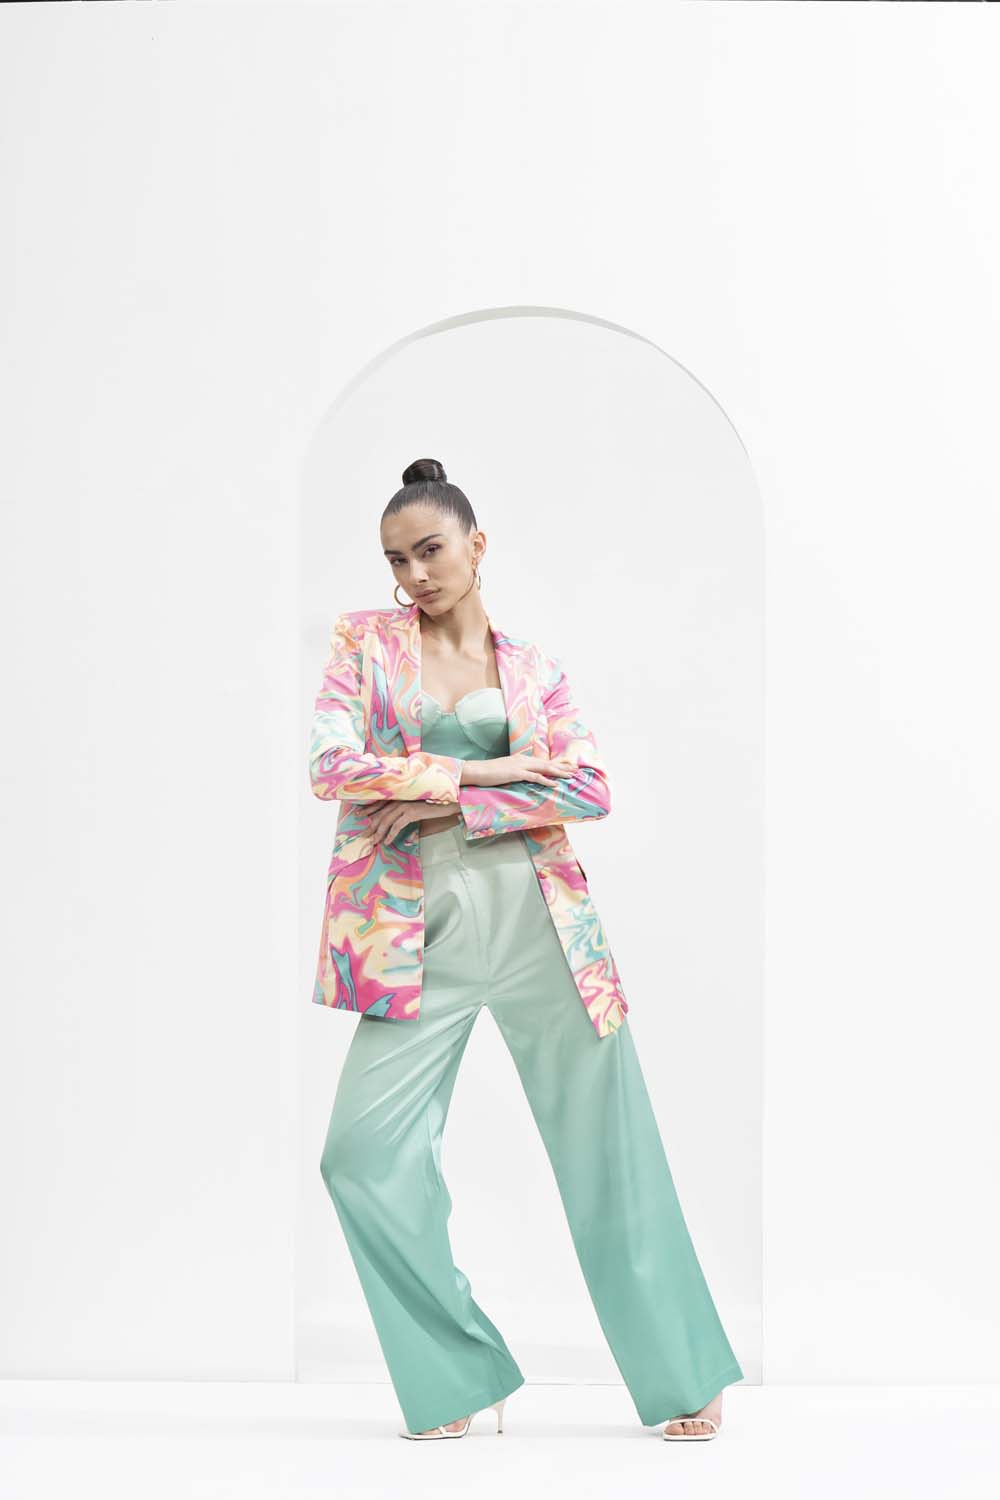 Blurred printed satin jacket, ombre printed corset bustier, and pants.